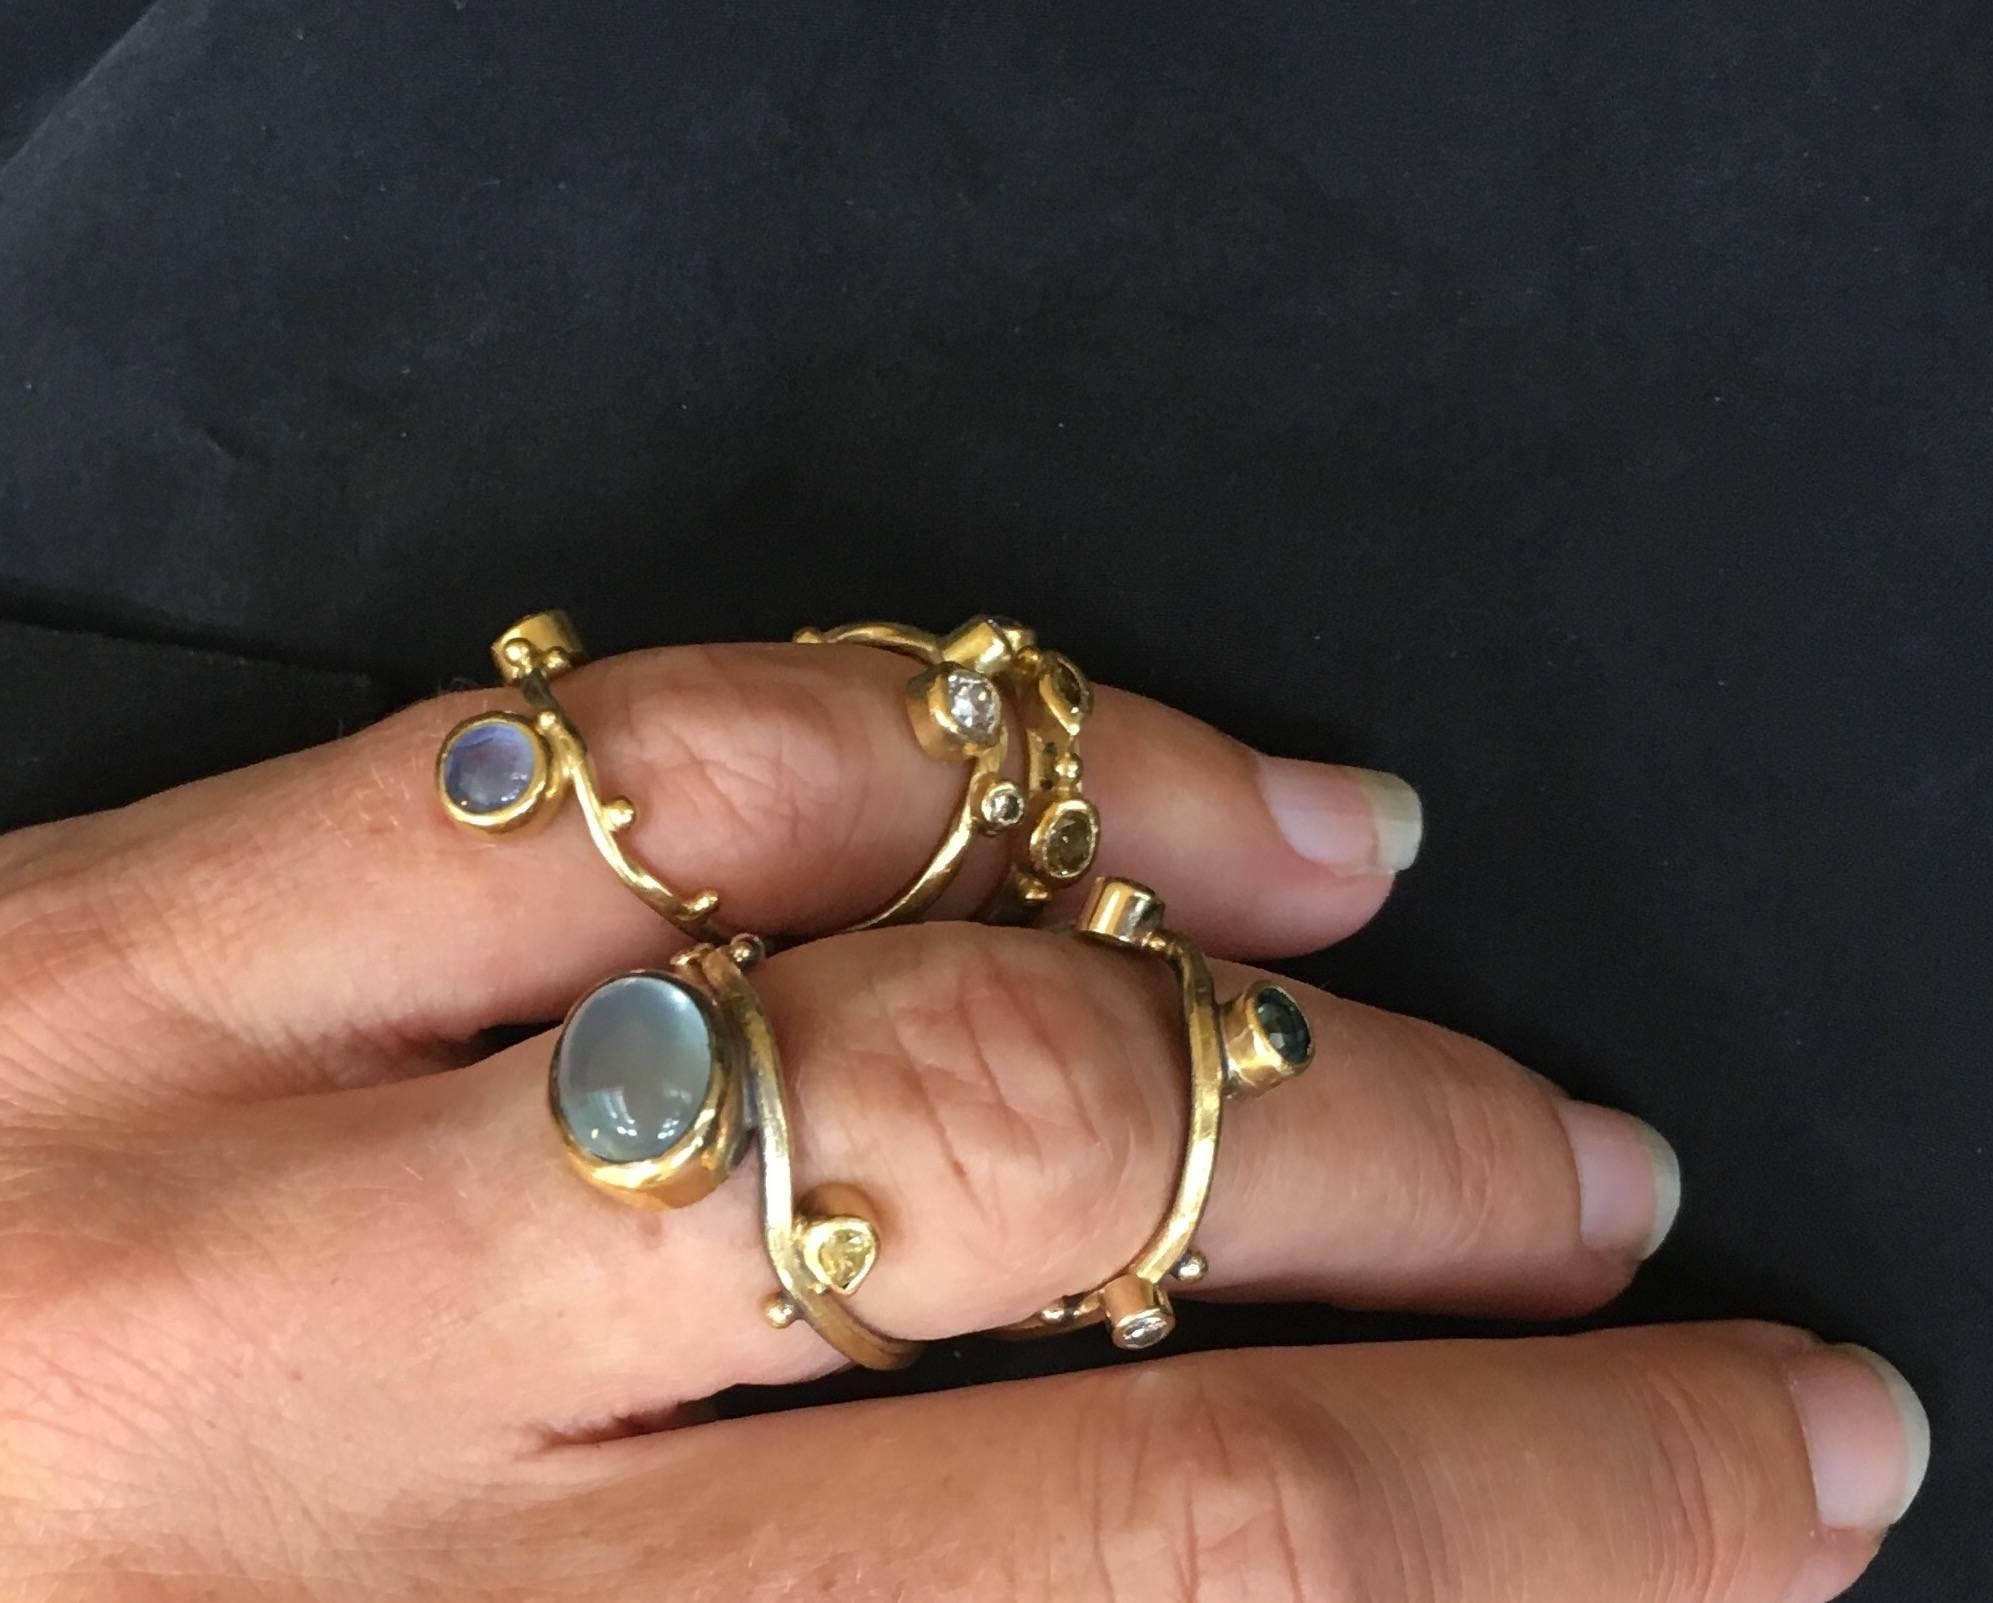 You wear this unique ring in the middle of your finger, with a ringband on each side of the knuckle.
It is made in oxidized silver, 18, 22 and 24 karat gold with a blue aquamarine, green sapphire, natural yellow 0.12 ct. pear shaped diamond, 0.02